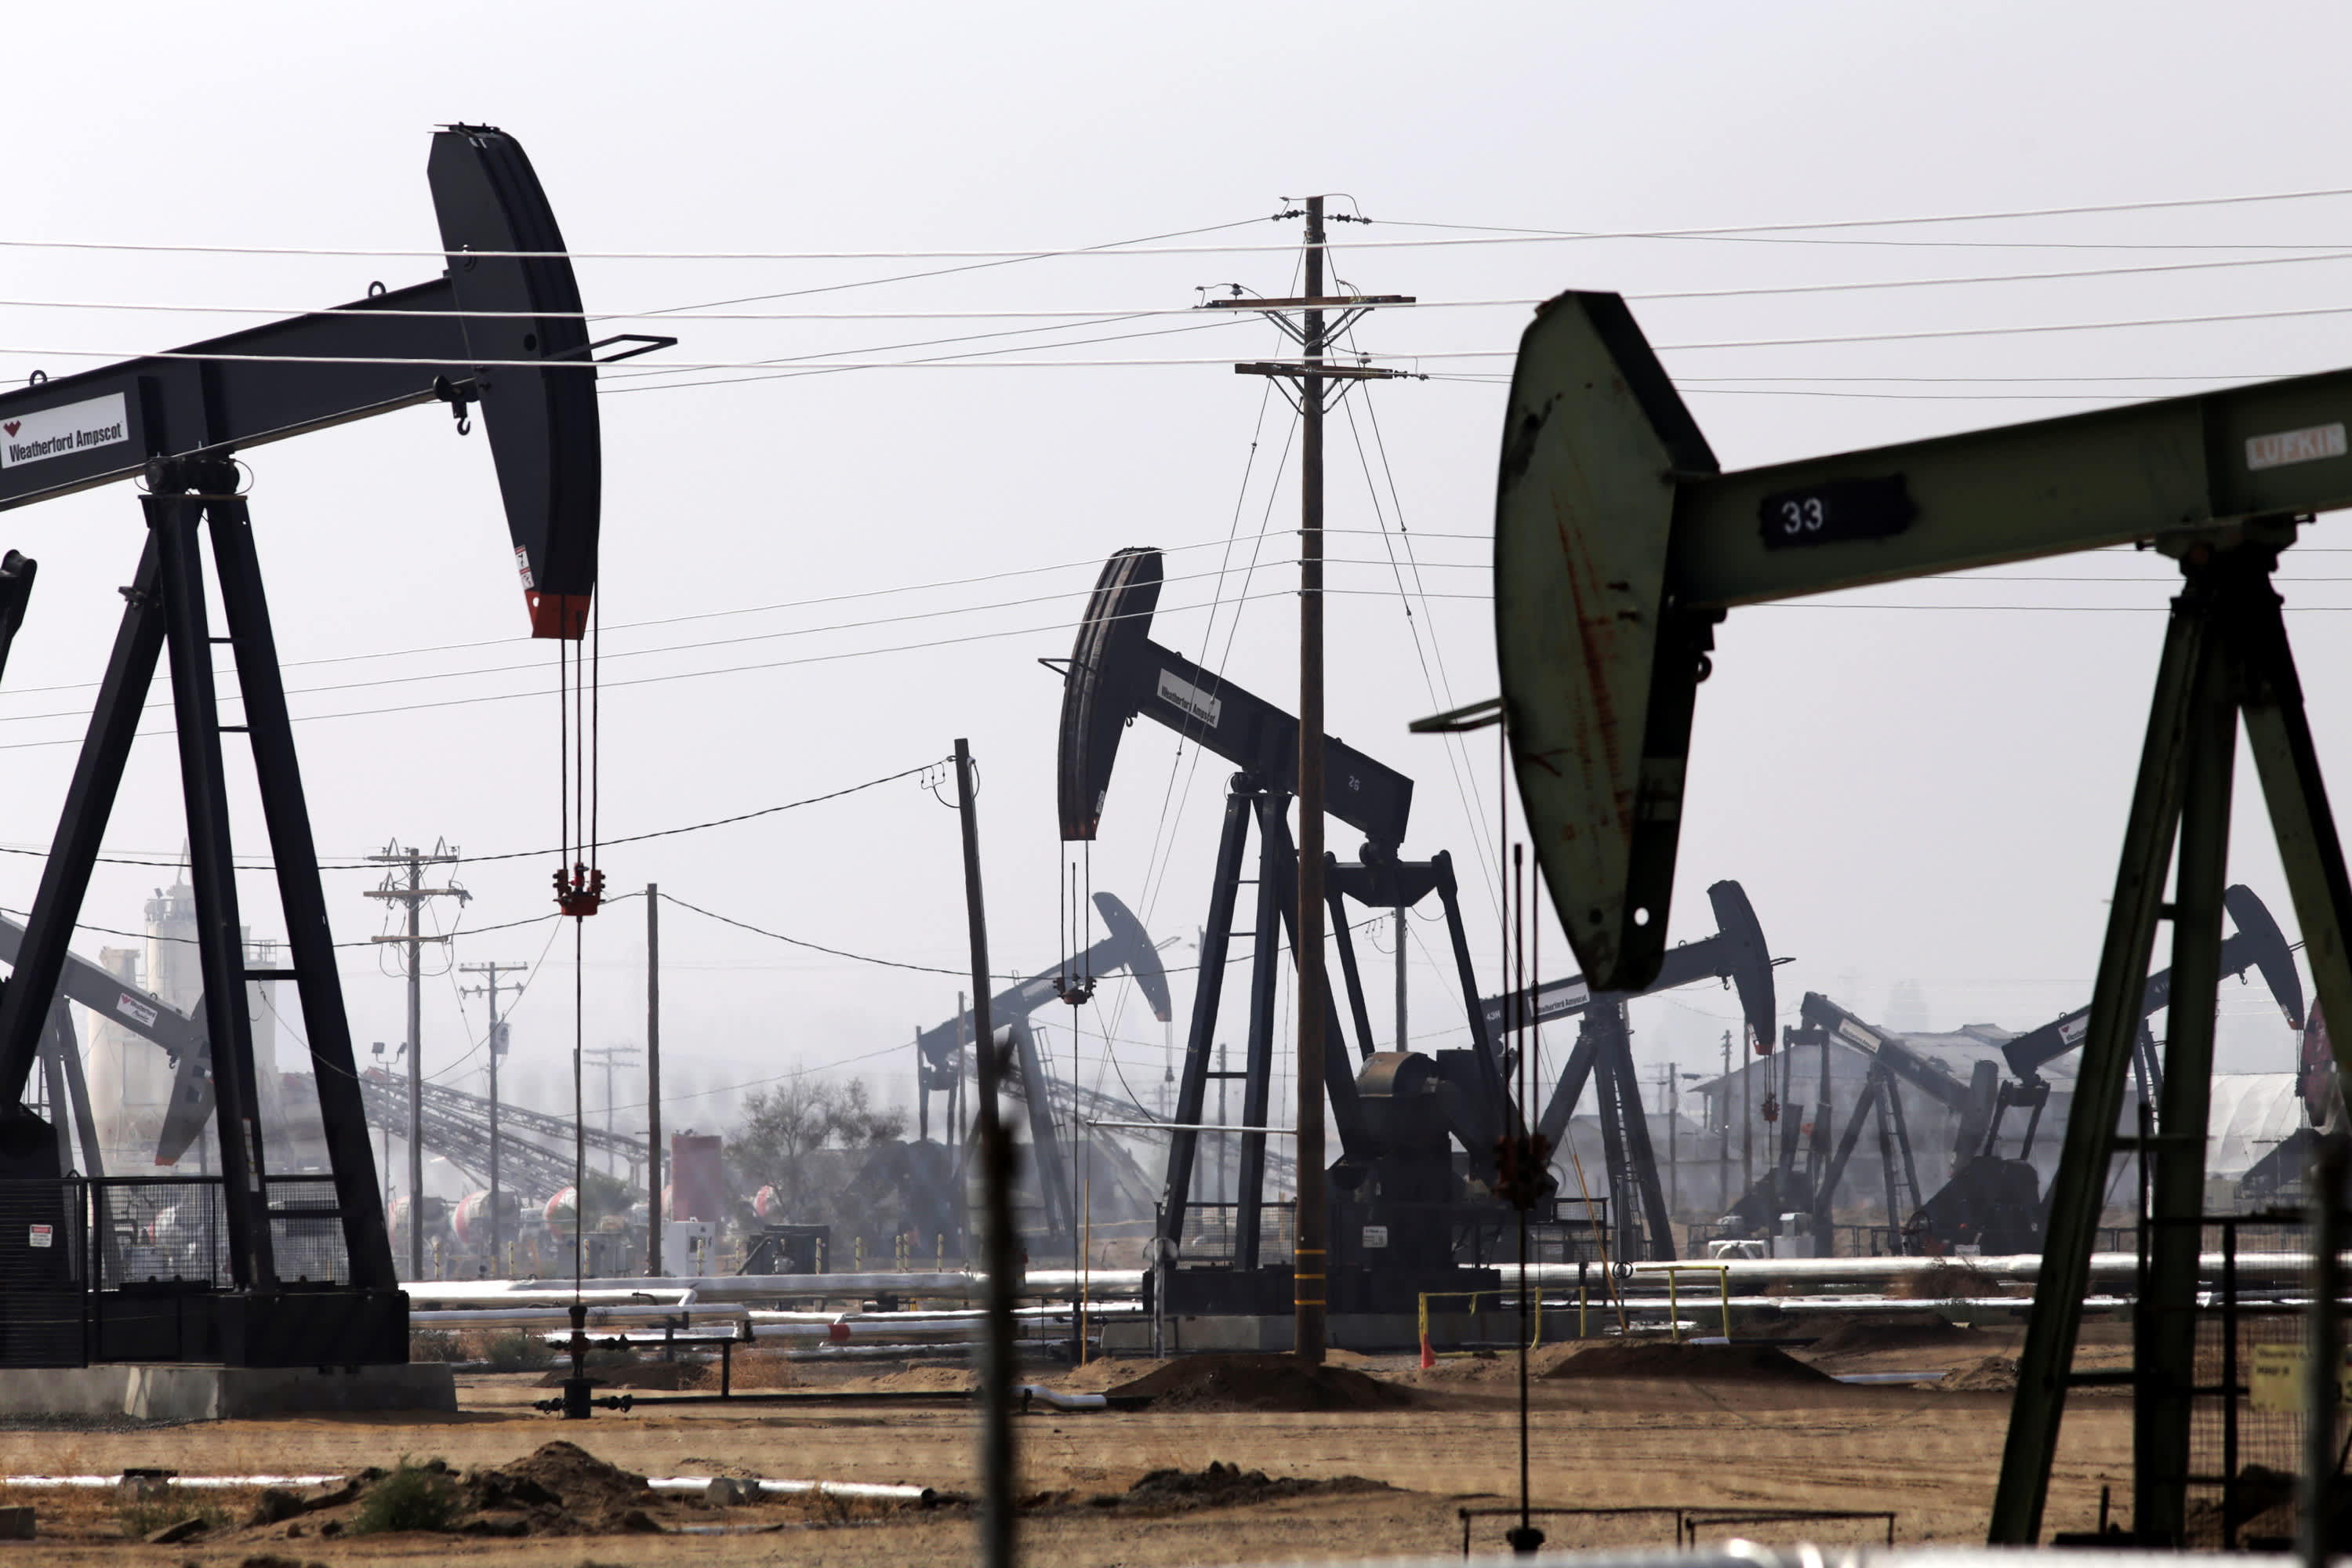 Oil is expected to continue to fluctuate in 2023, but prices may depend on China reopening